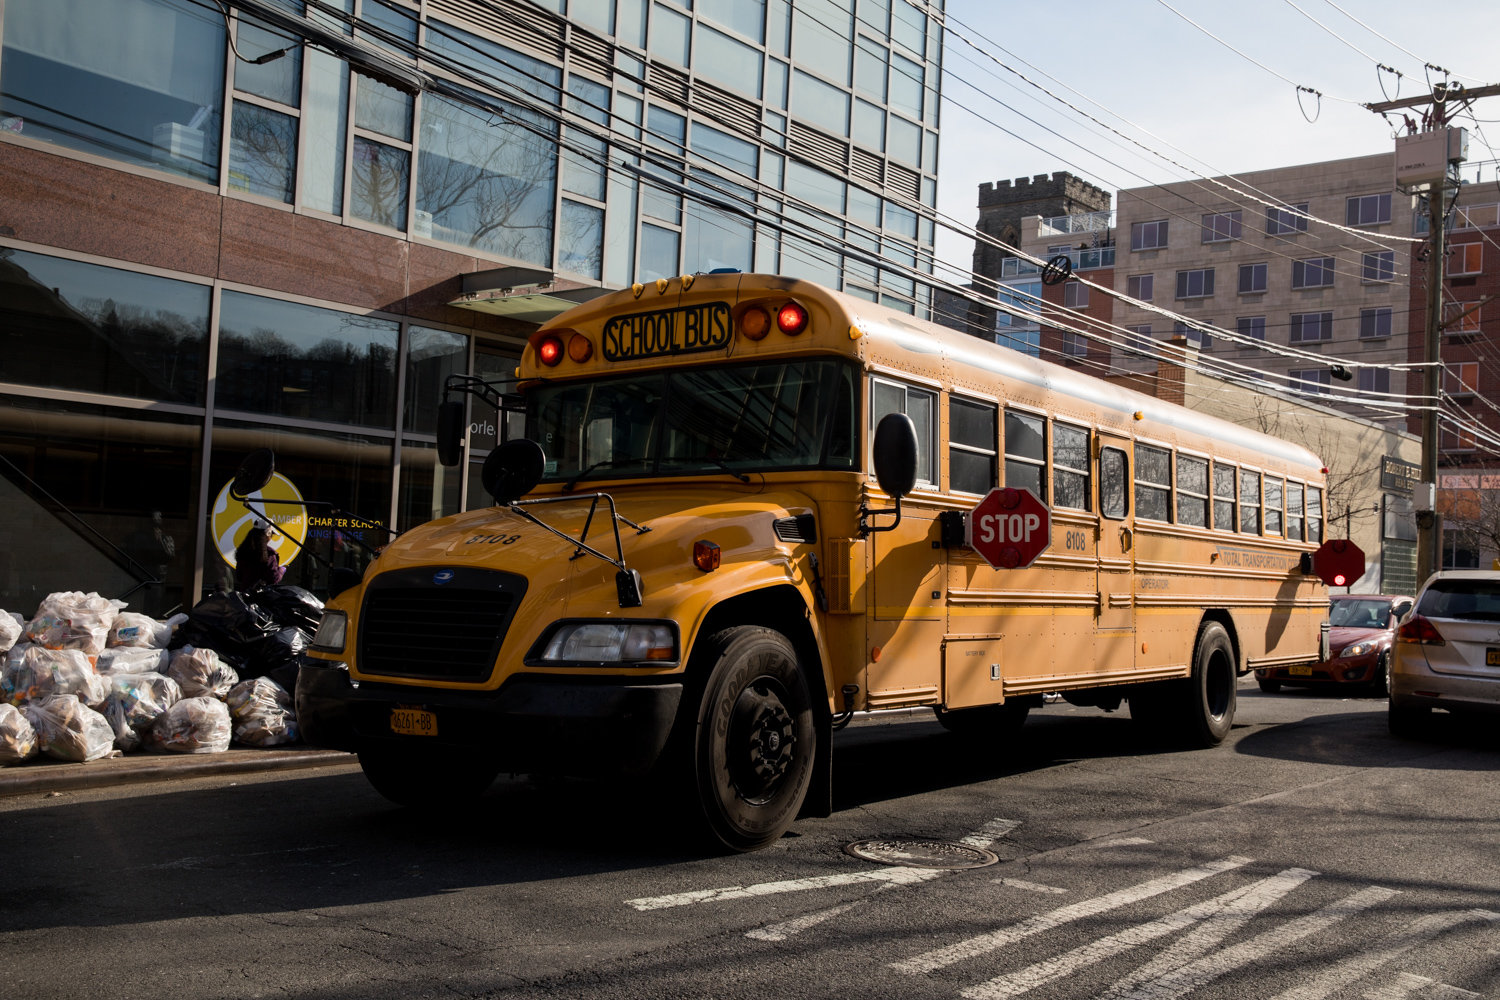 Parents may soon have to find alternative means of getting their children to school, if Amber Charter moves forward with plans to discontinue bus service.